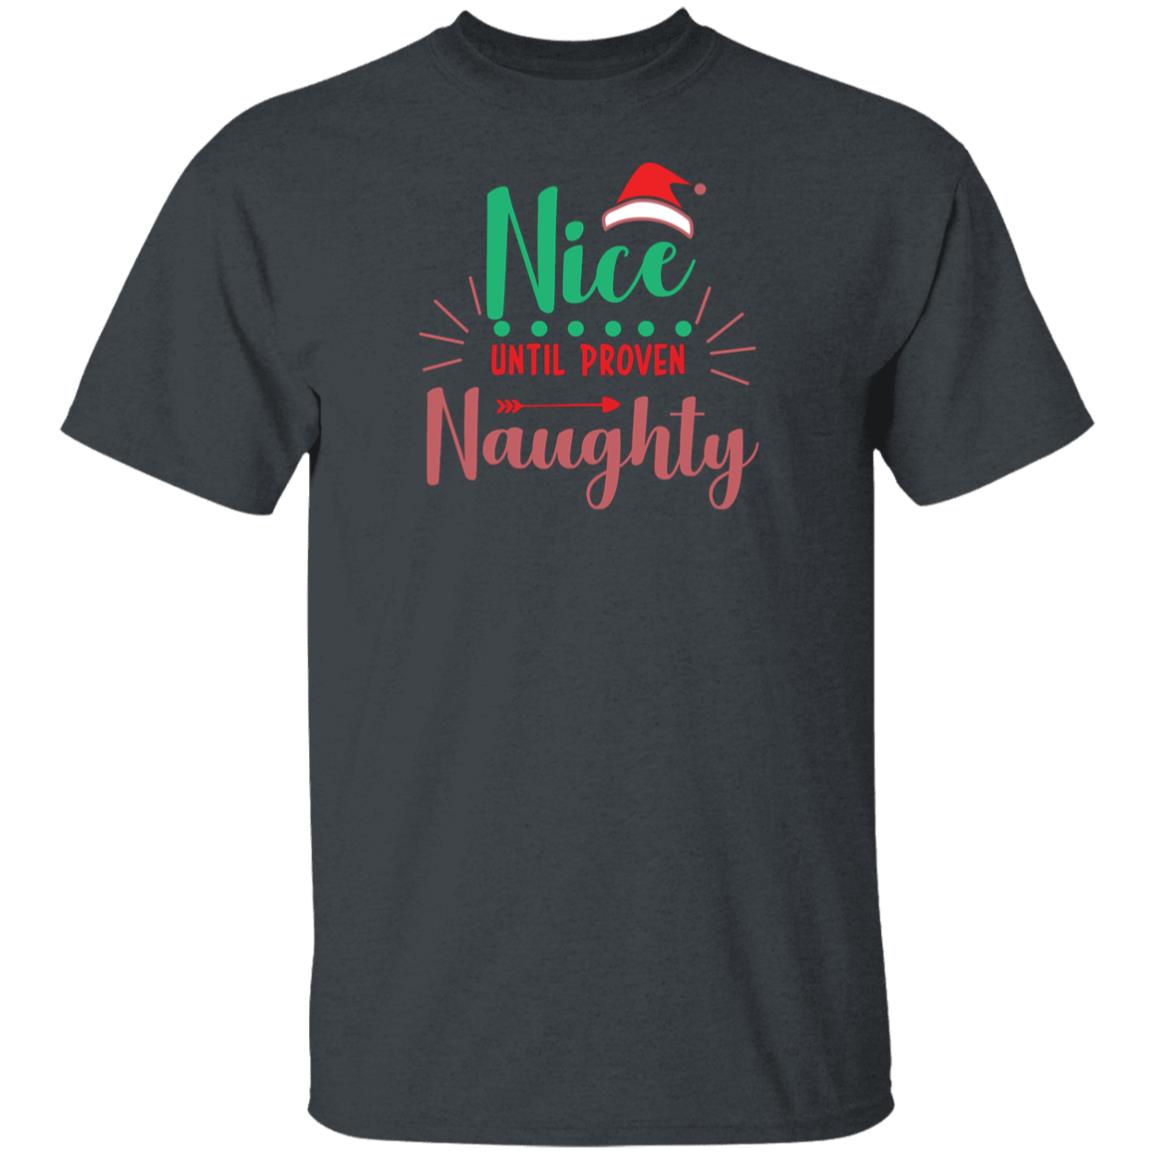 Nice until proven Naughty